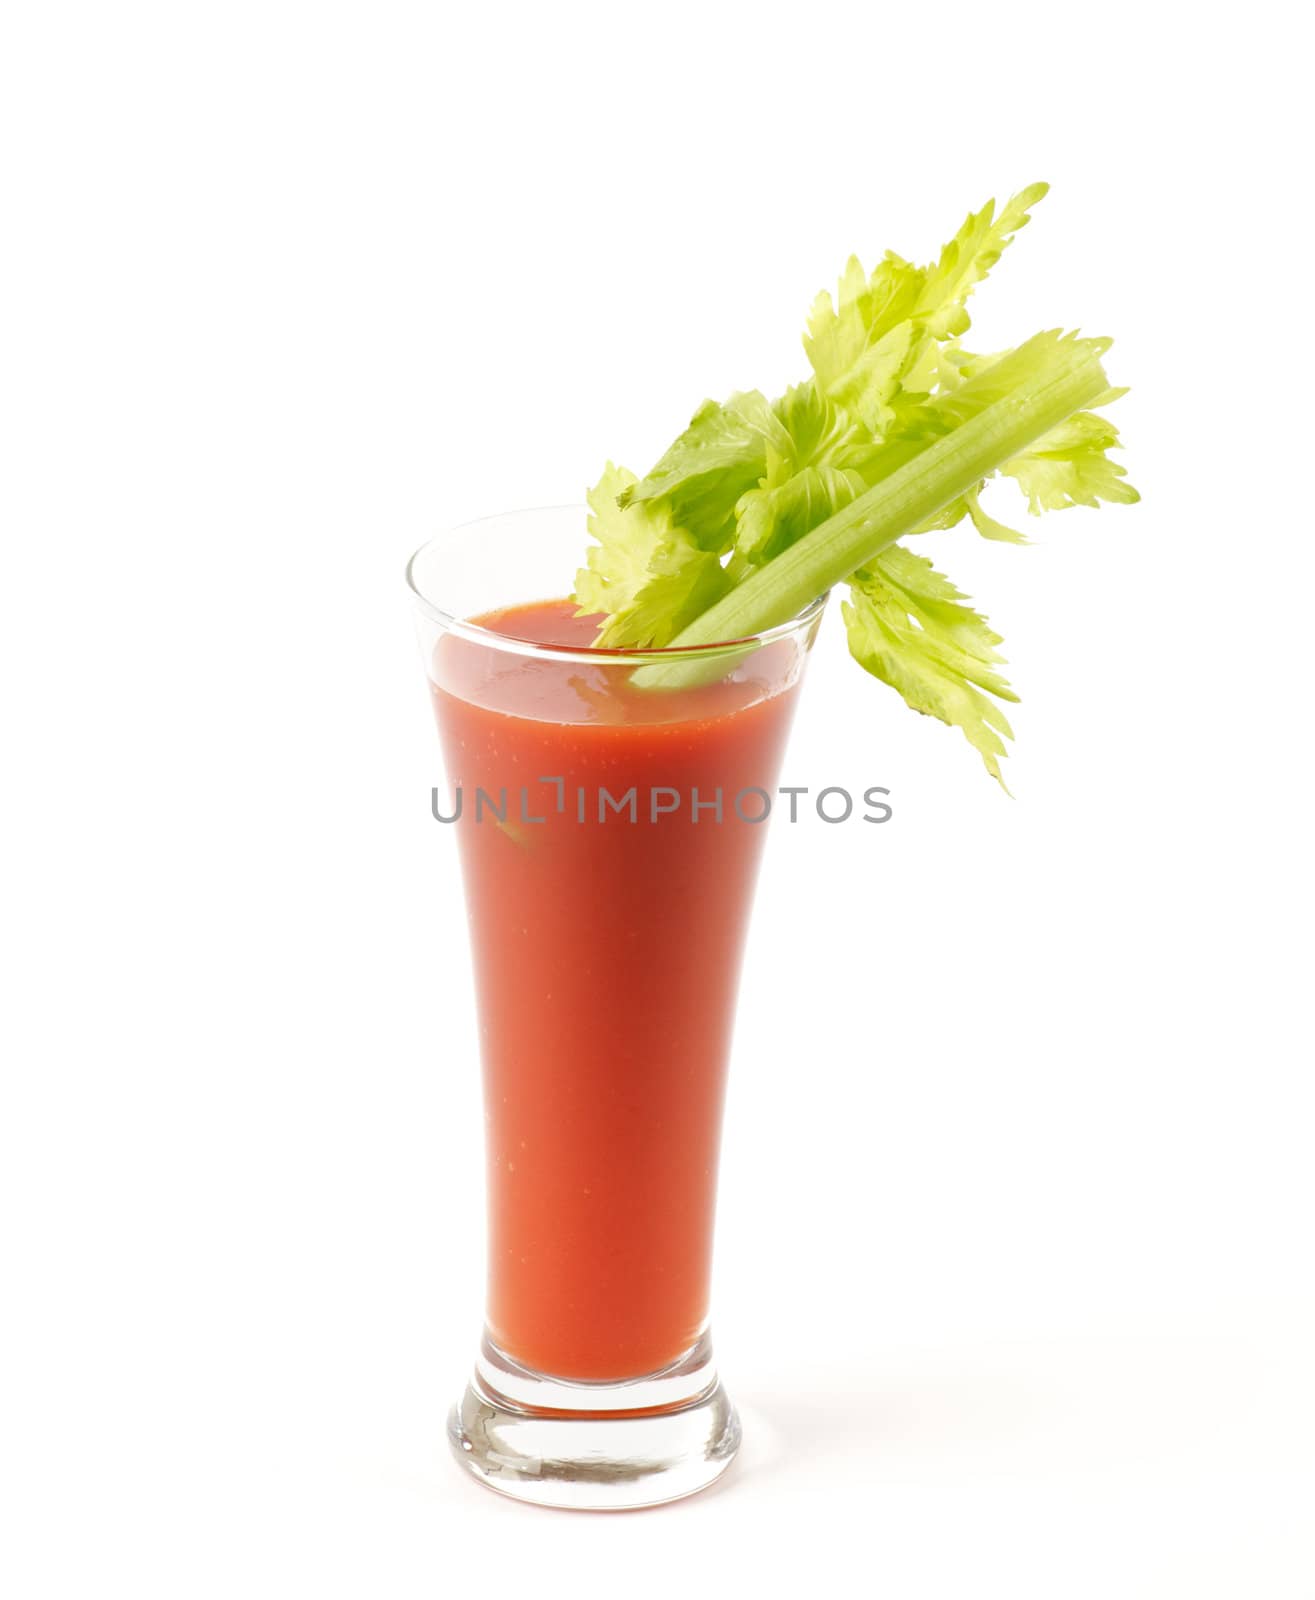 Spicy Tomato Juice with Celery isolated on white background